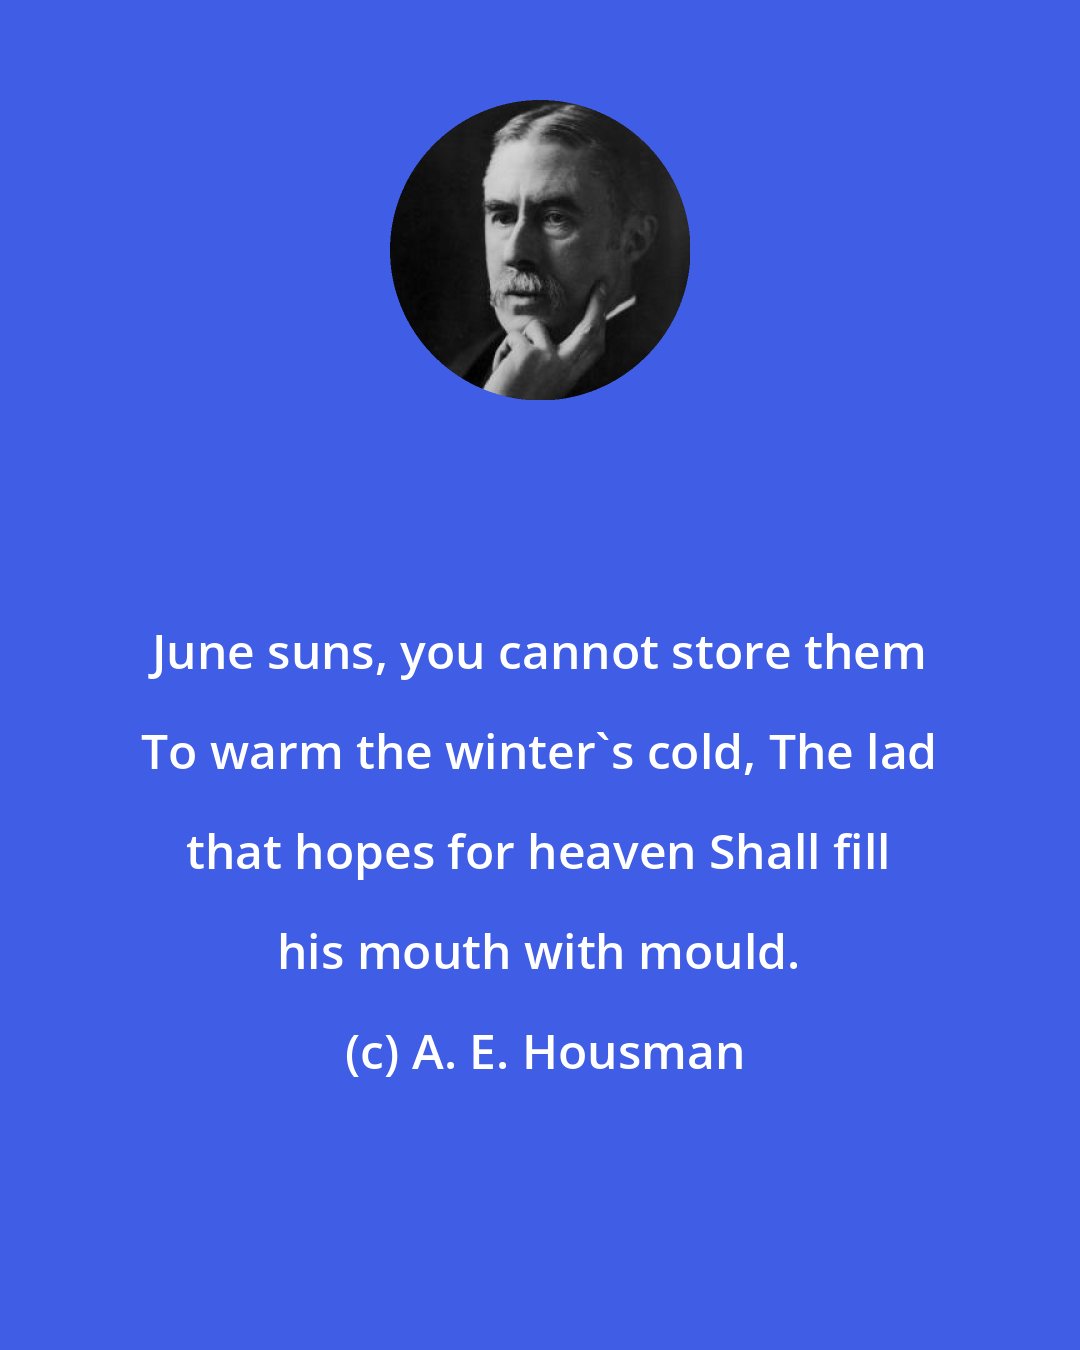 A. E. Housman: June suns, you cannot store them To warm the winter's cold, The lad that hopes for heaven Shall fill his mouth with mould.